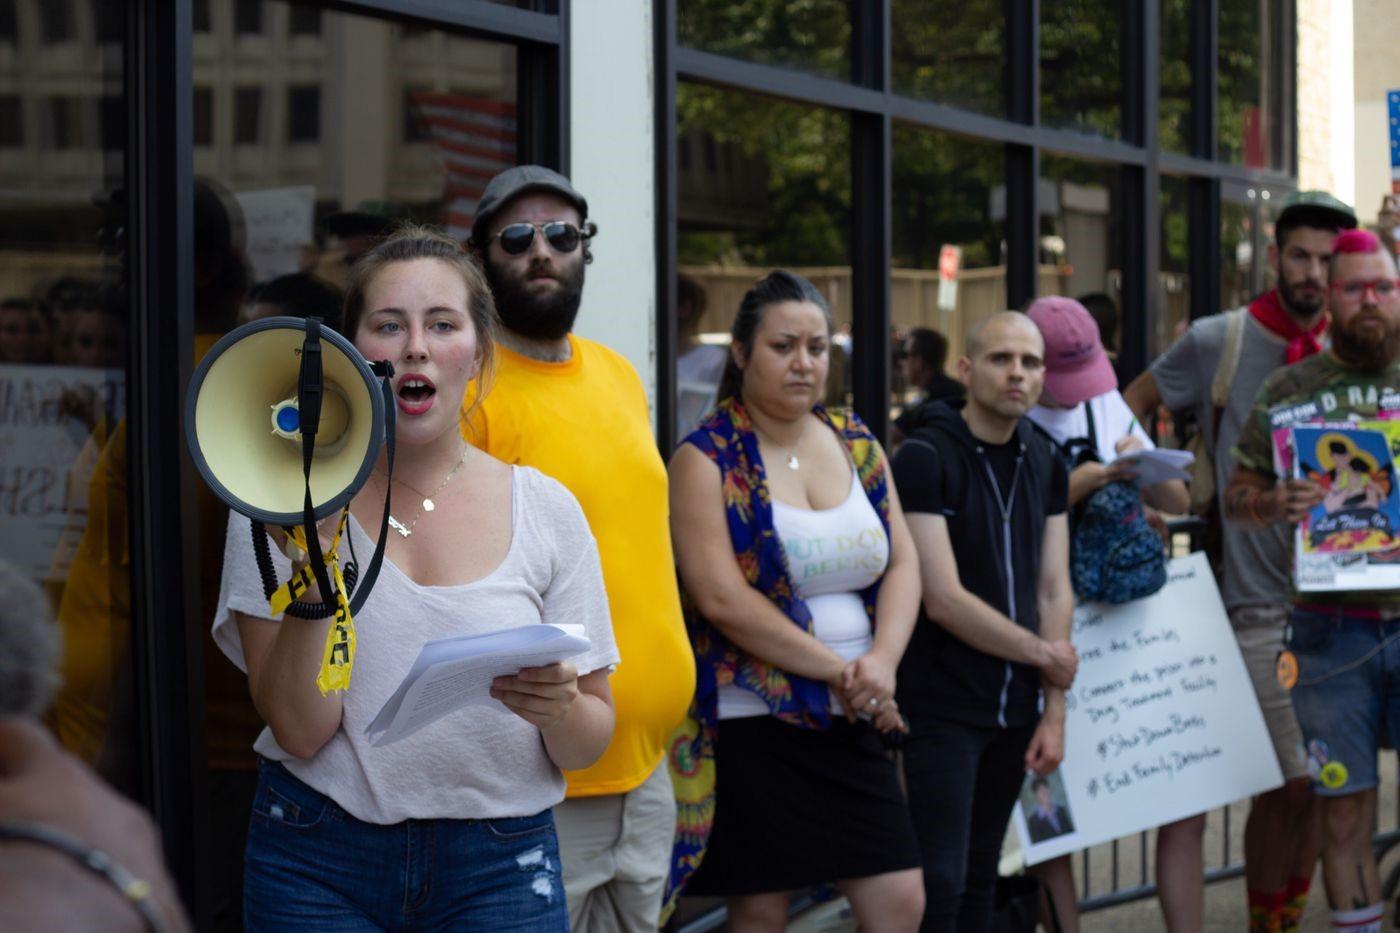 RRC student Lizzie Horne (left, with megaphone) leads a protest against border detention camps for Never Again Action in Center City on July 4, 2019.